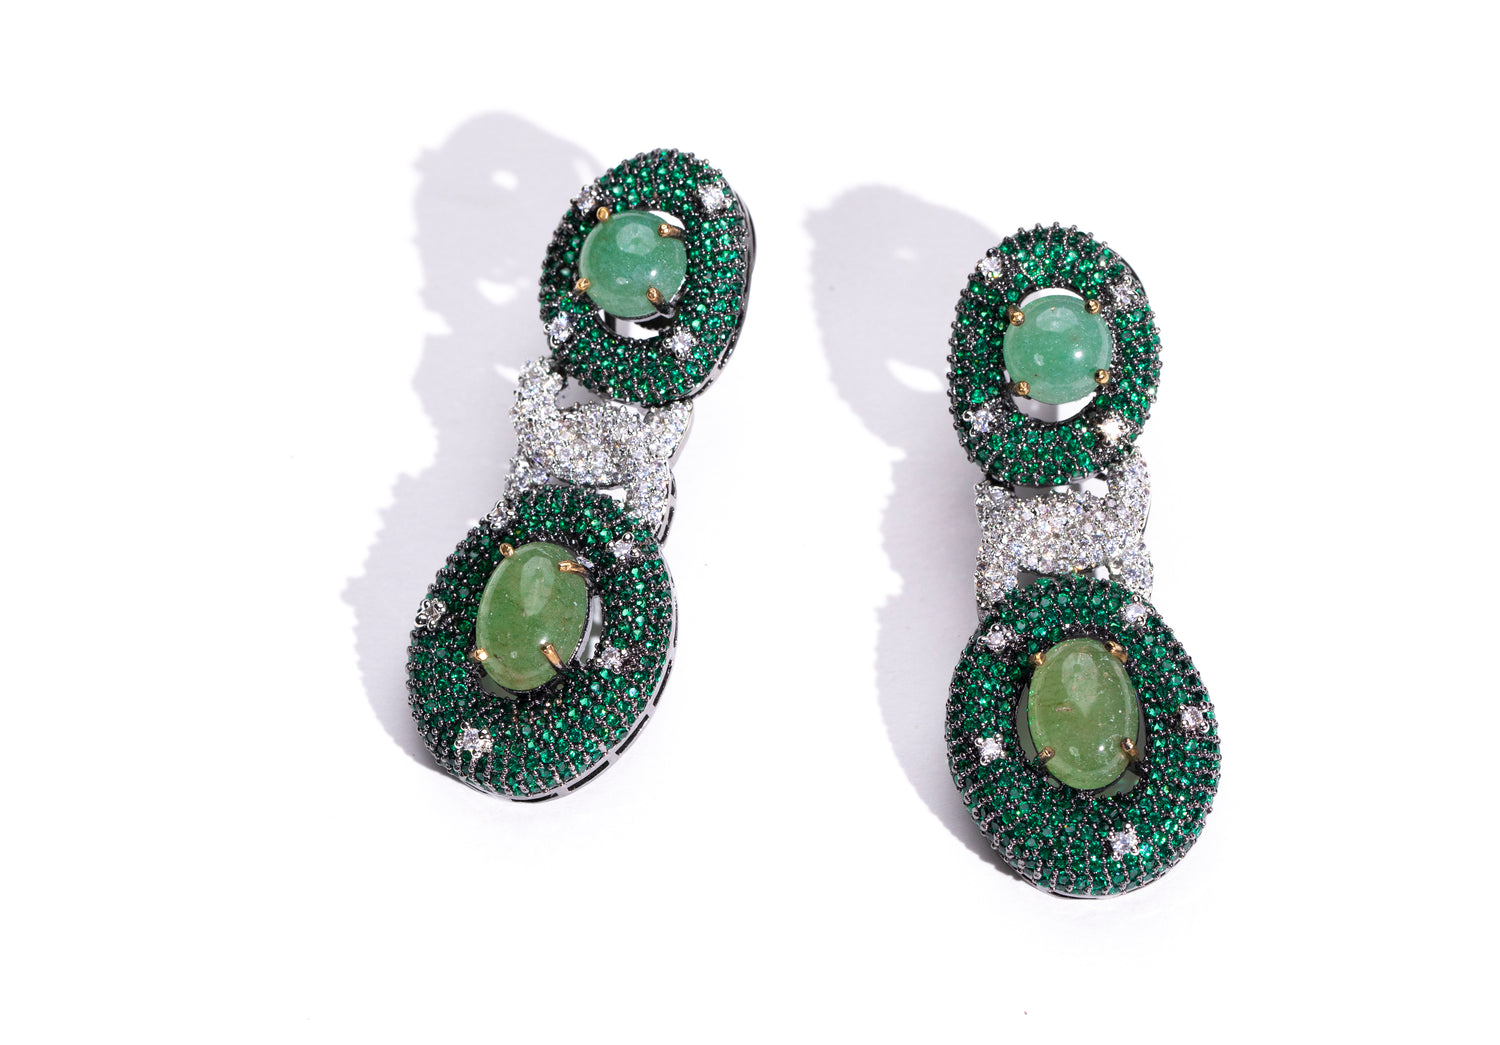 Sophisticated Emerald and Swarovski Earrings: Complete your look with these elegant statement earrings